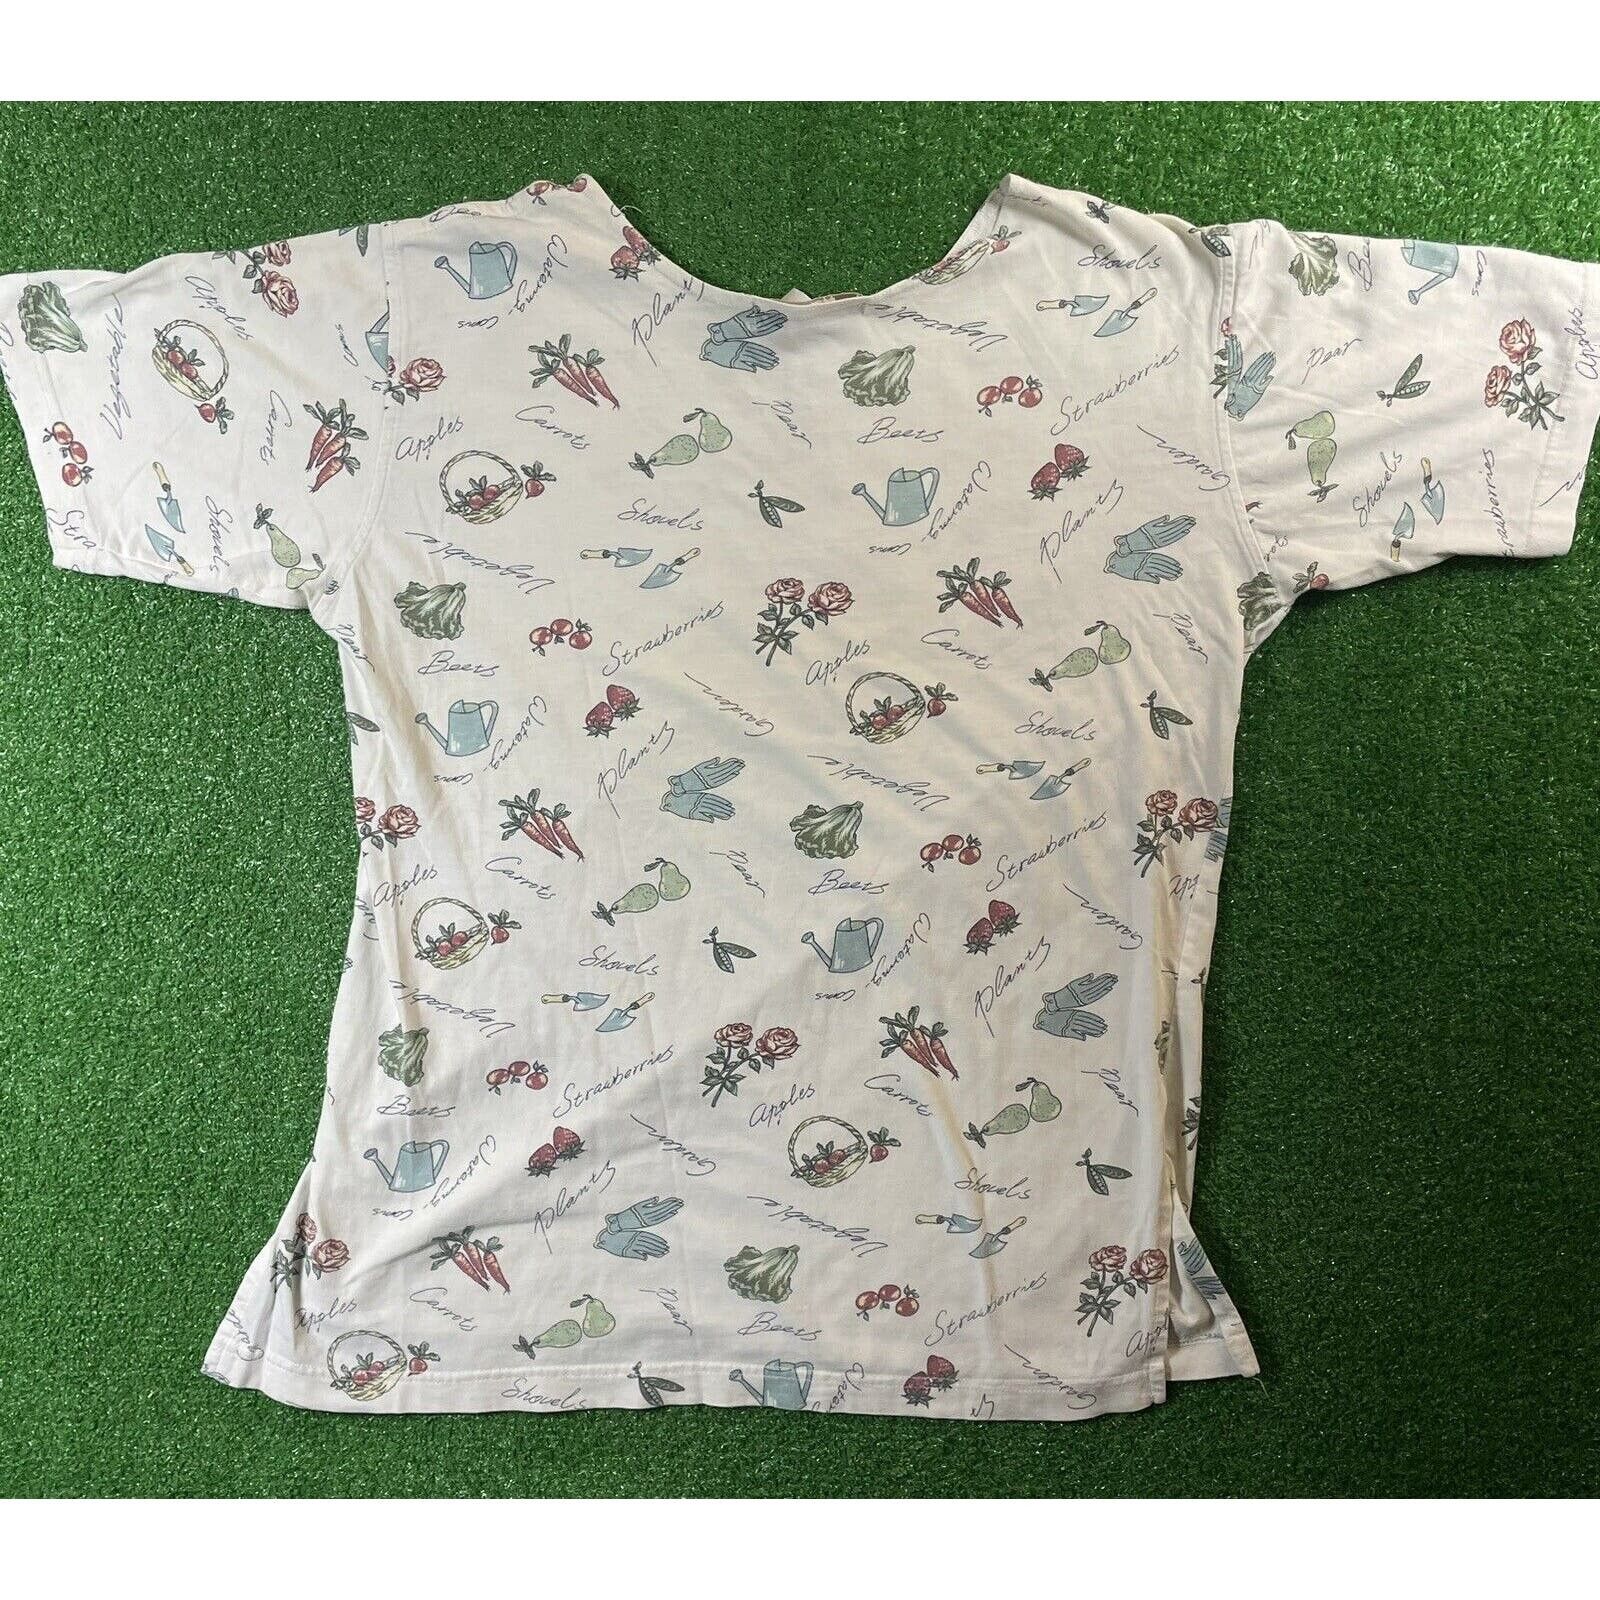 Vintage Vintage 90s Gardening All Over Small Strawberry Shirt USA Size S / US 4 / IT 40 - 5 Preview